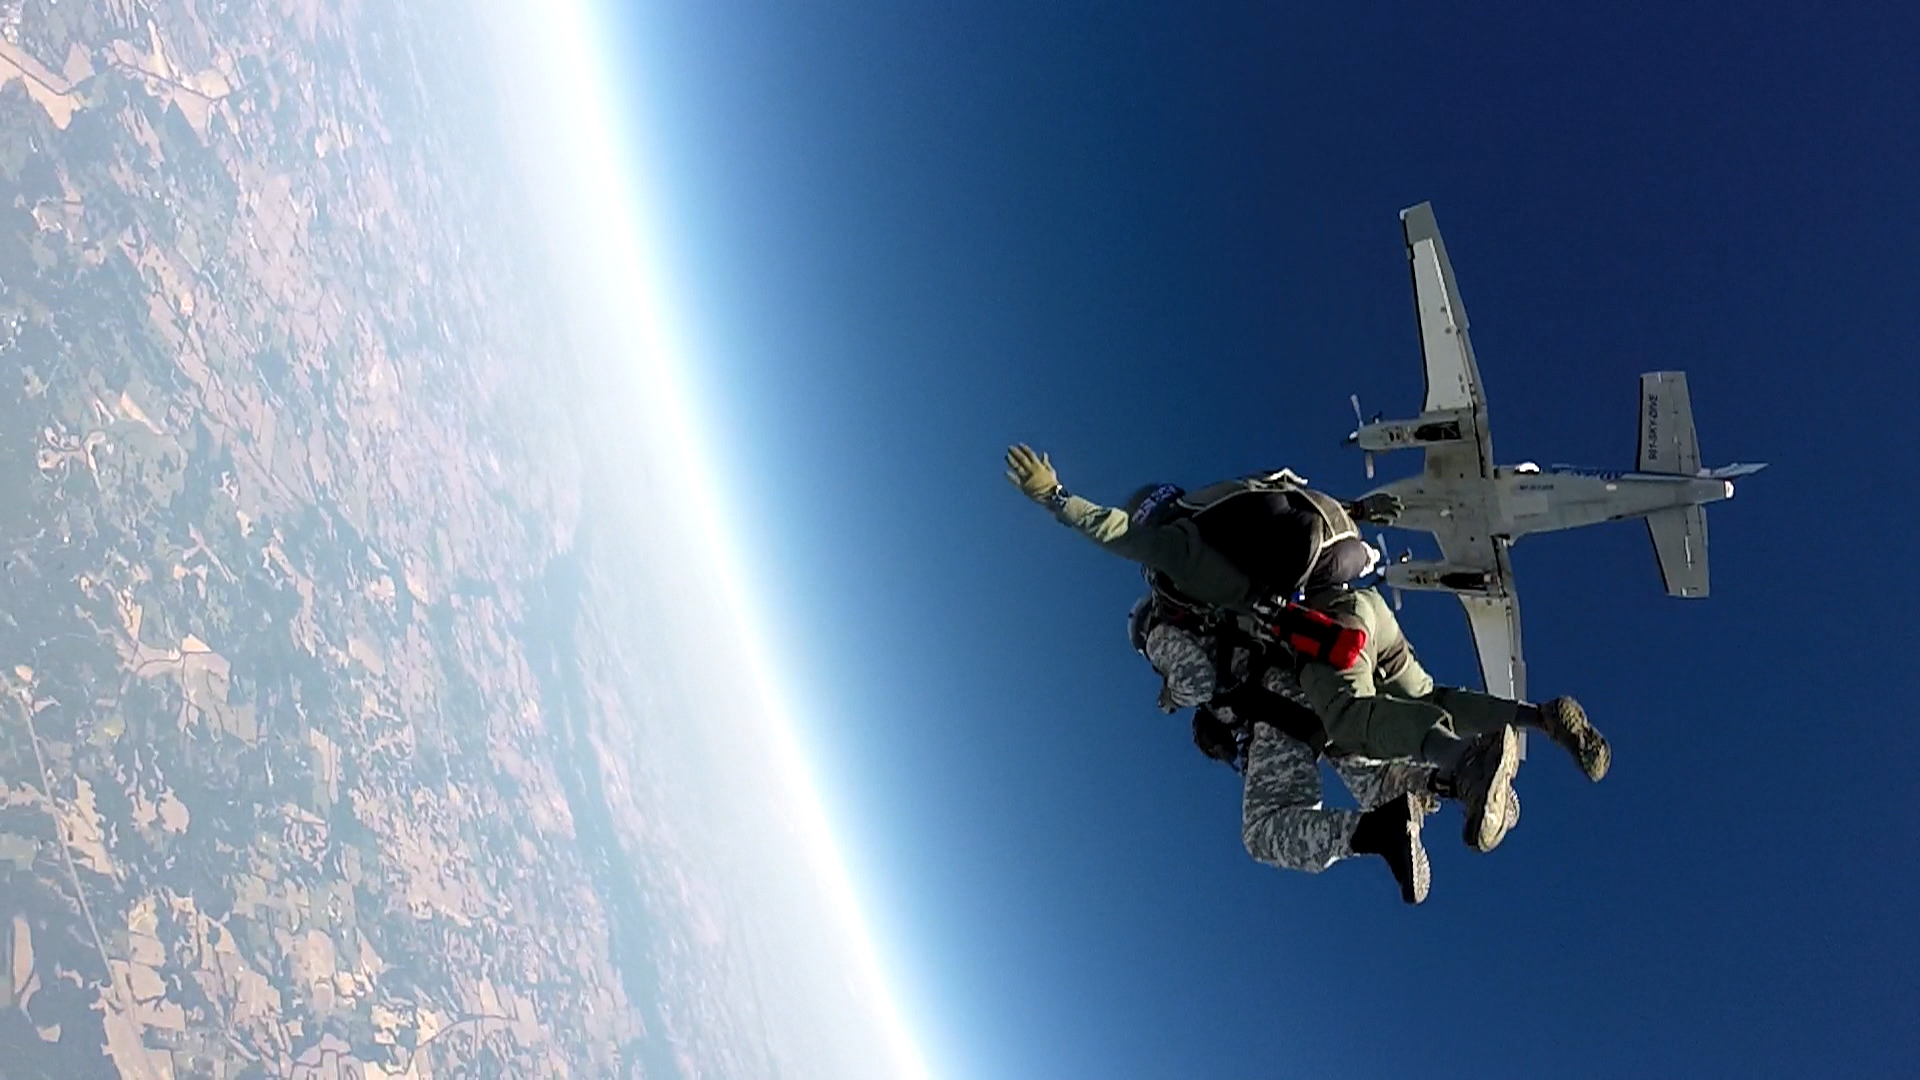 Incredible Adventures High-Altitude Skydive from a King Air